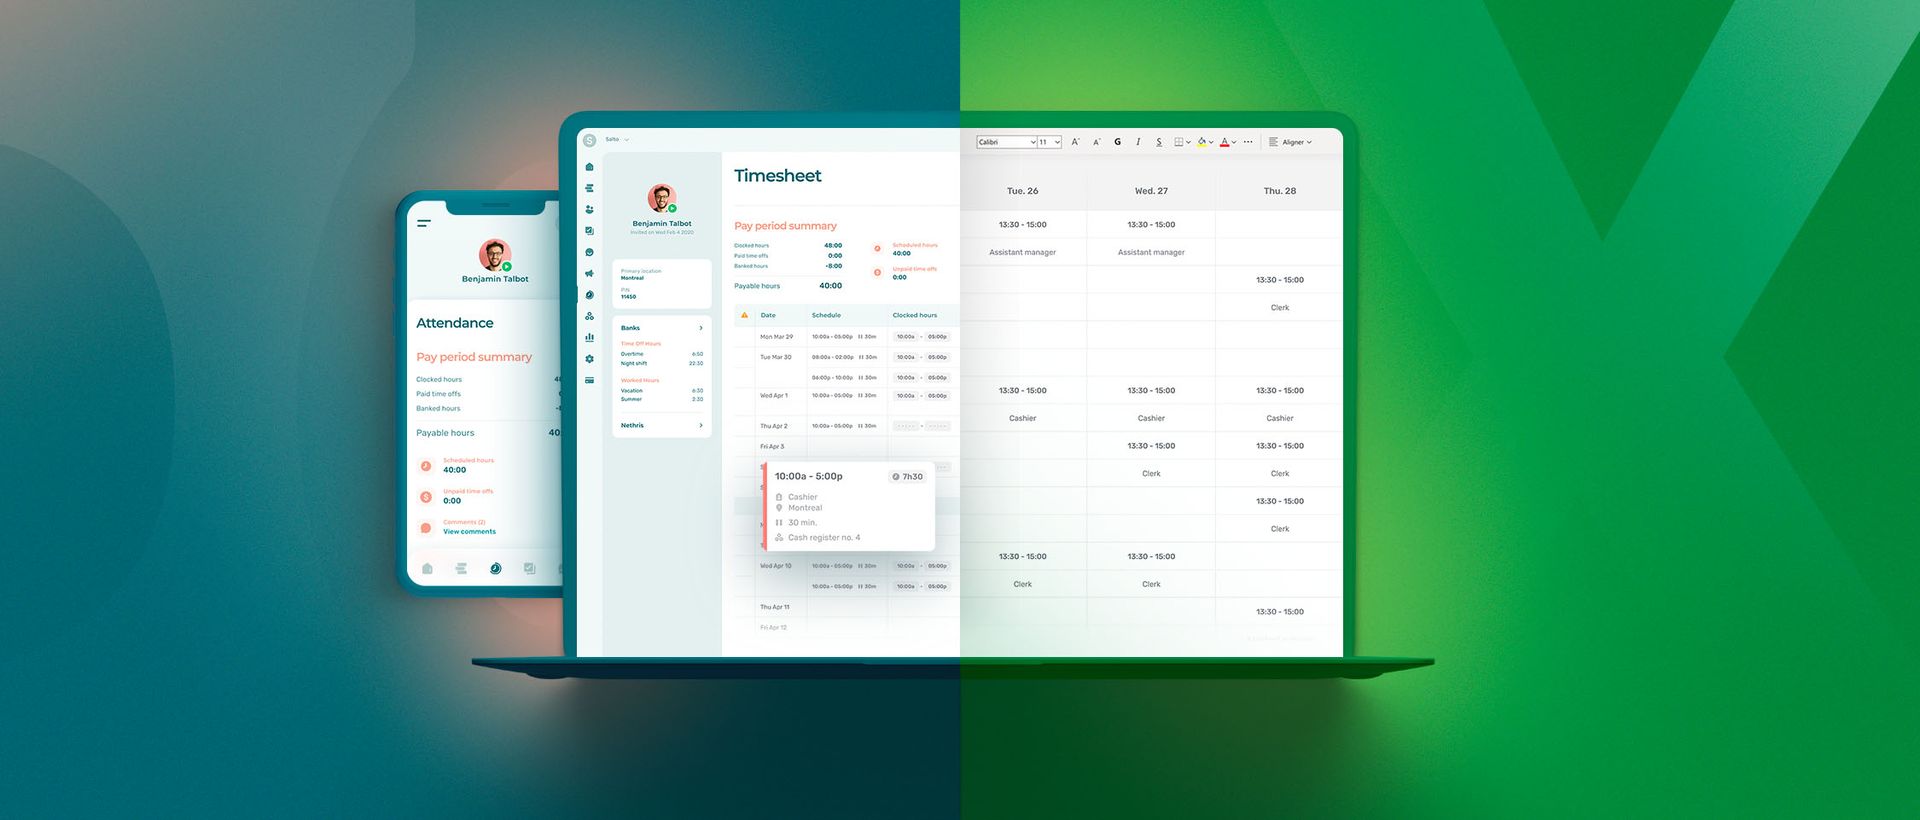 Comparison between Agendrix and Excel